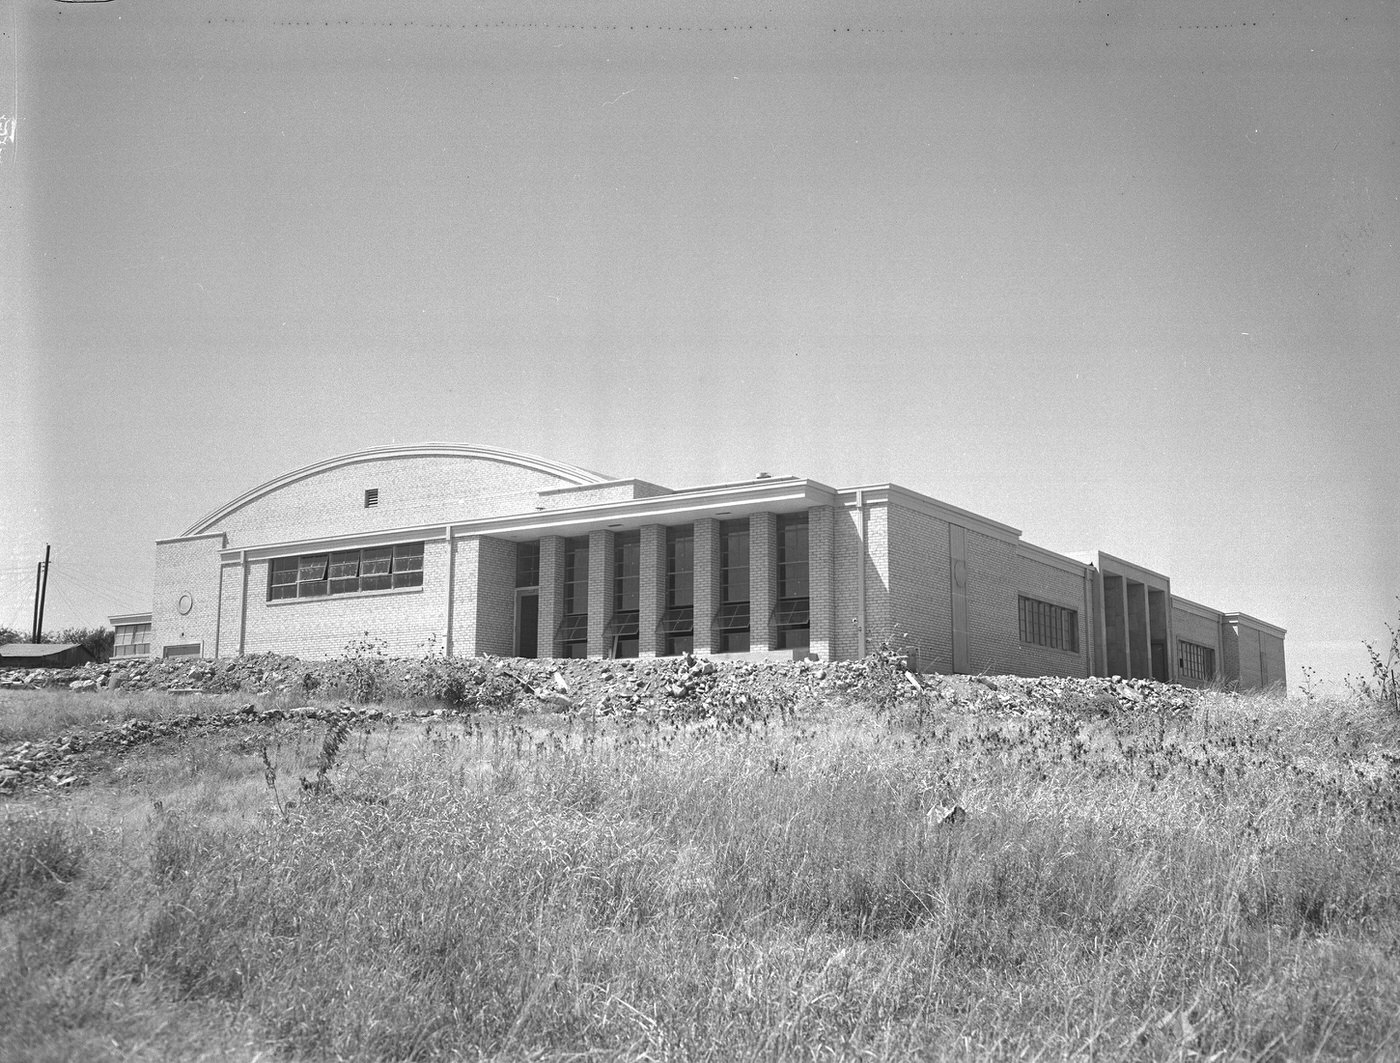 Construction of the North Side Recreation Center, Fort Worth, Texas, 1948